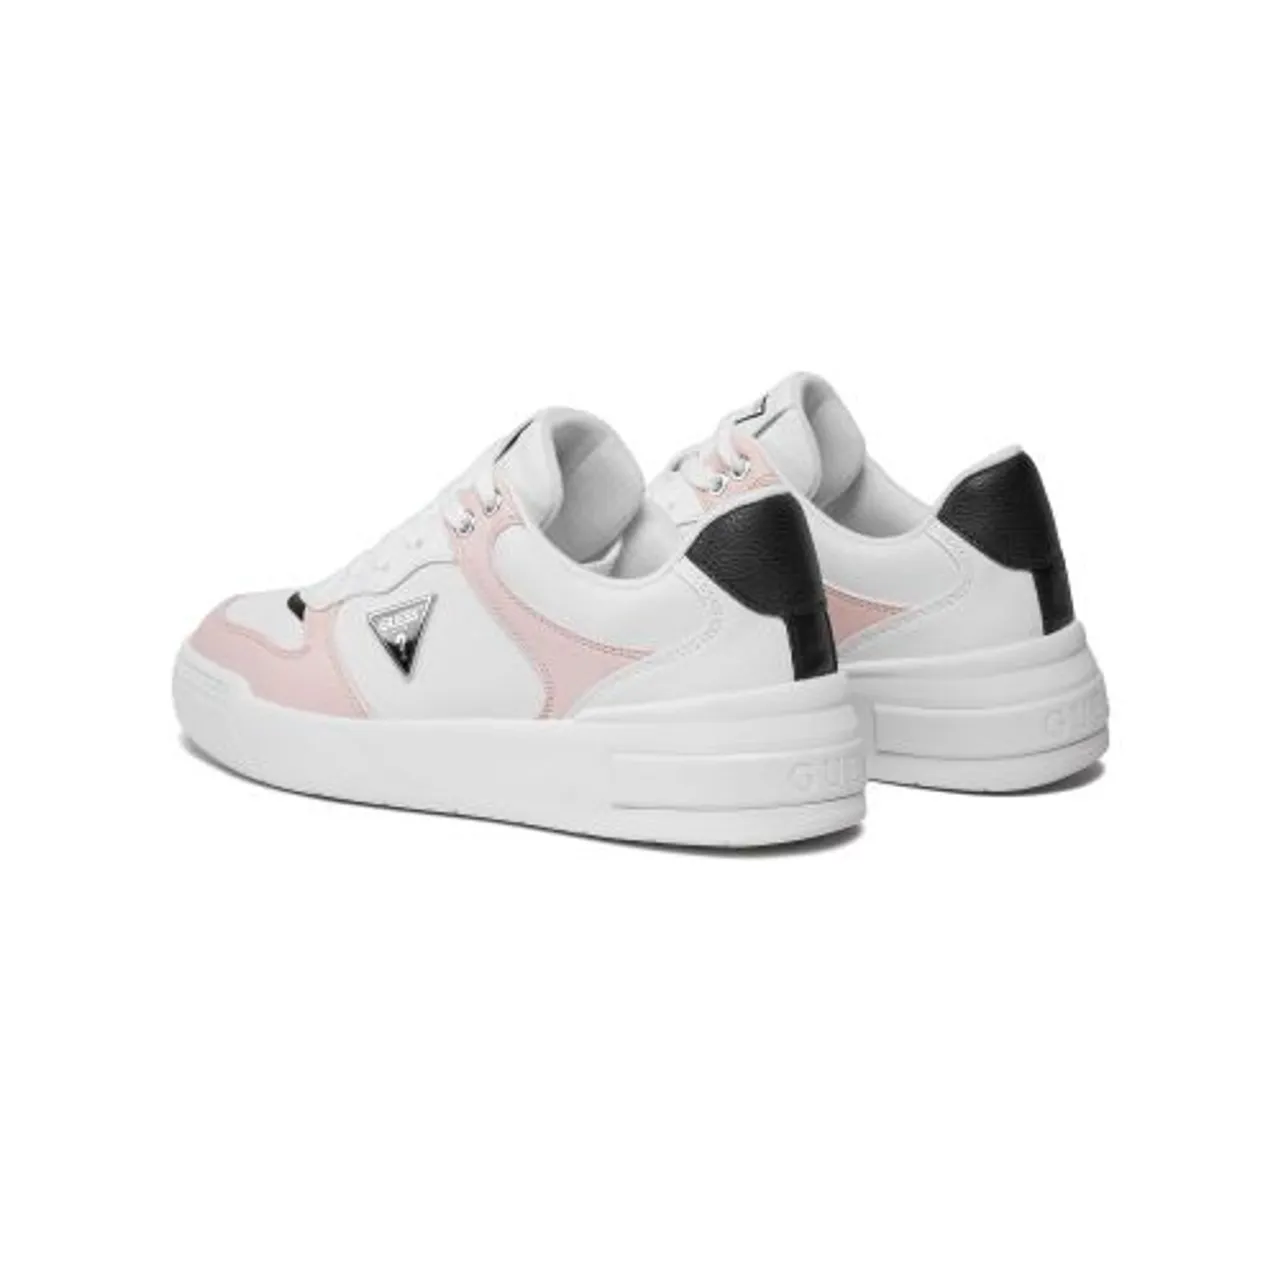 GUESS Womens White Light Pink Clarkz2 Trainer